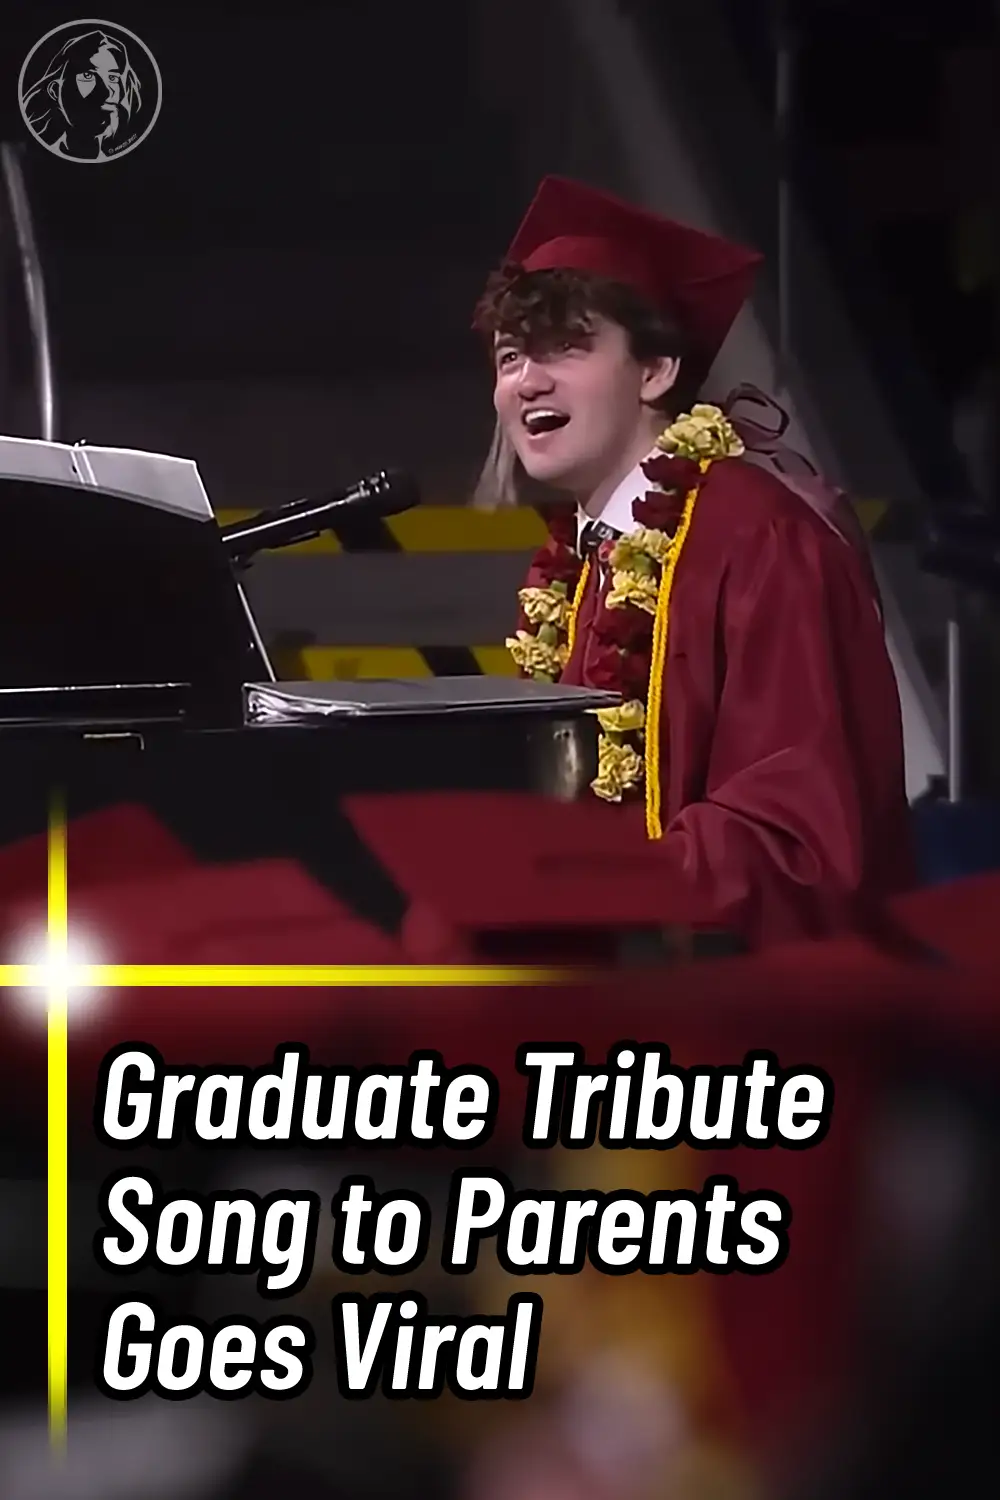 Graduate Tribute Song to Parents Goes Viral